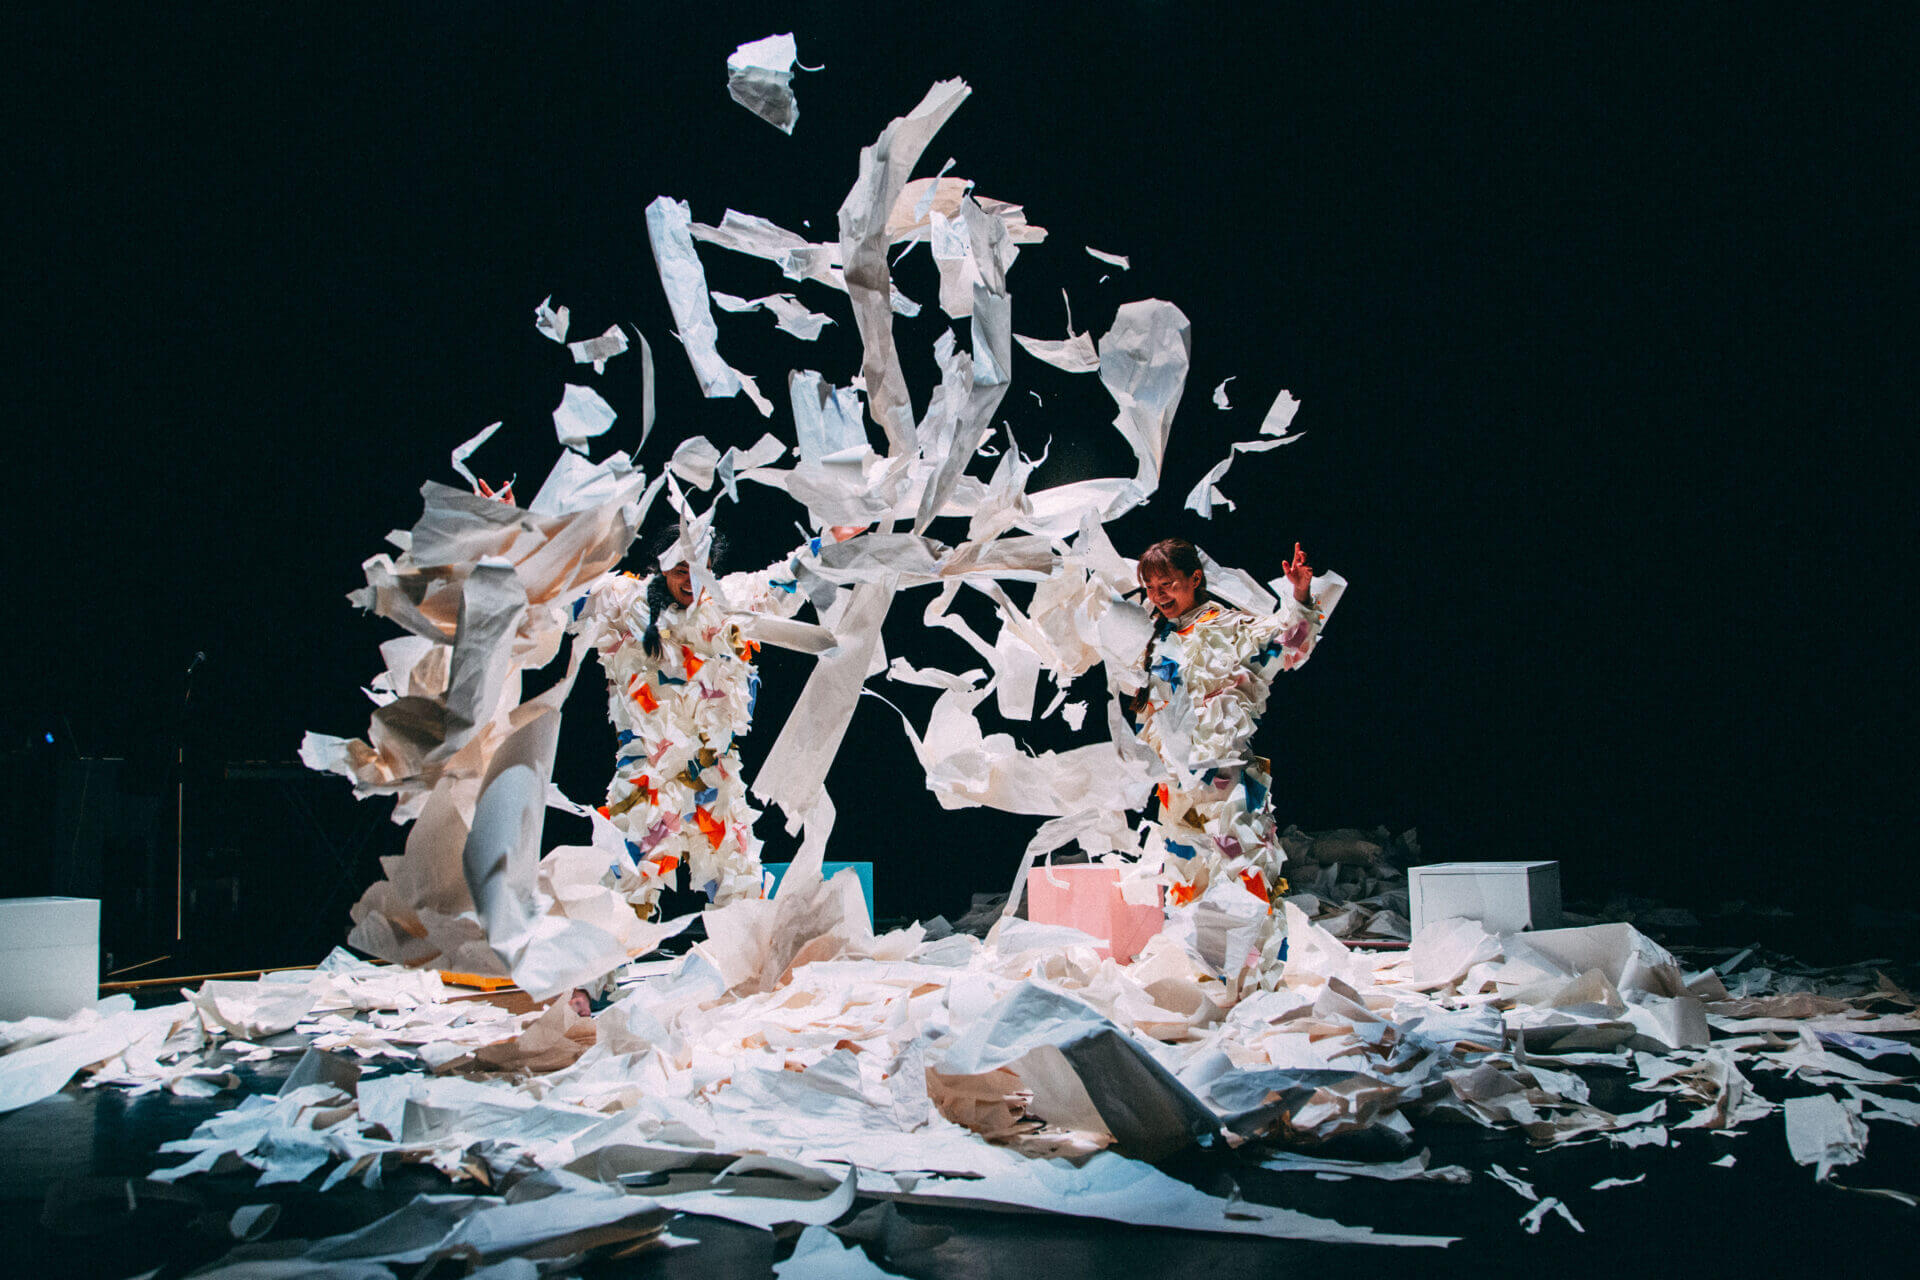 Two performers dressed in paper outfits throwing mounds of paper into the air. Floor is full of paper.